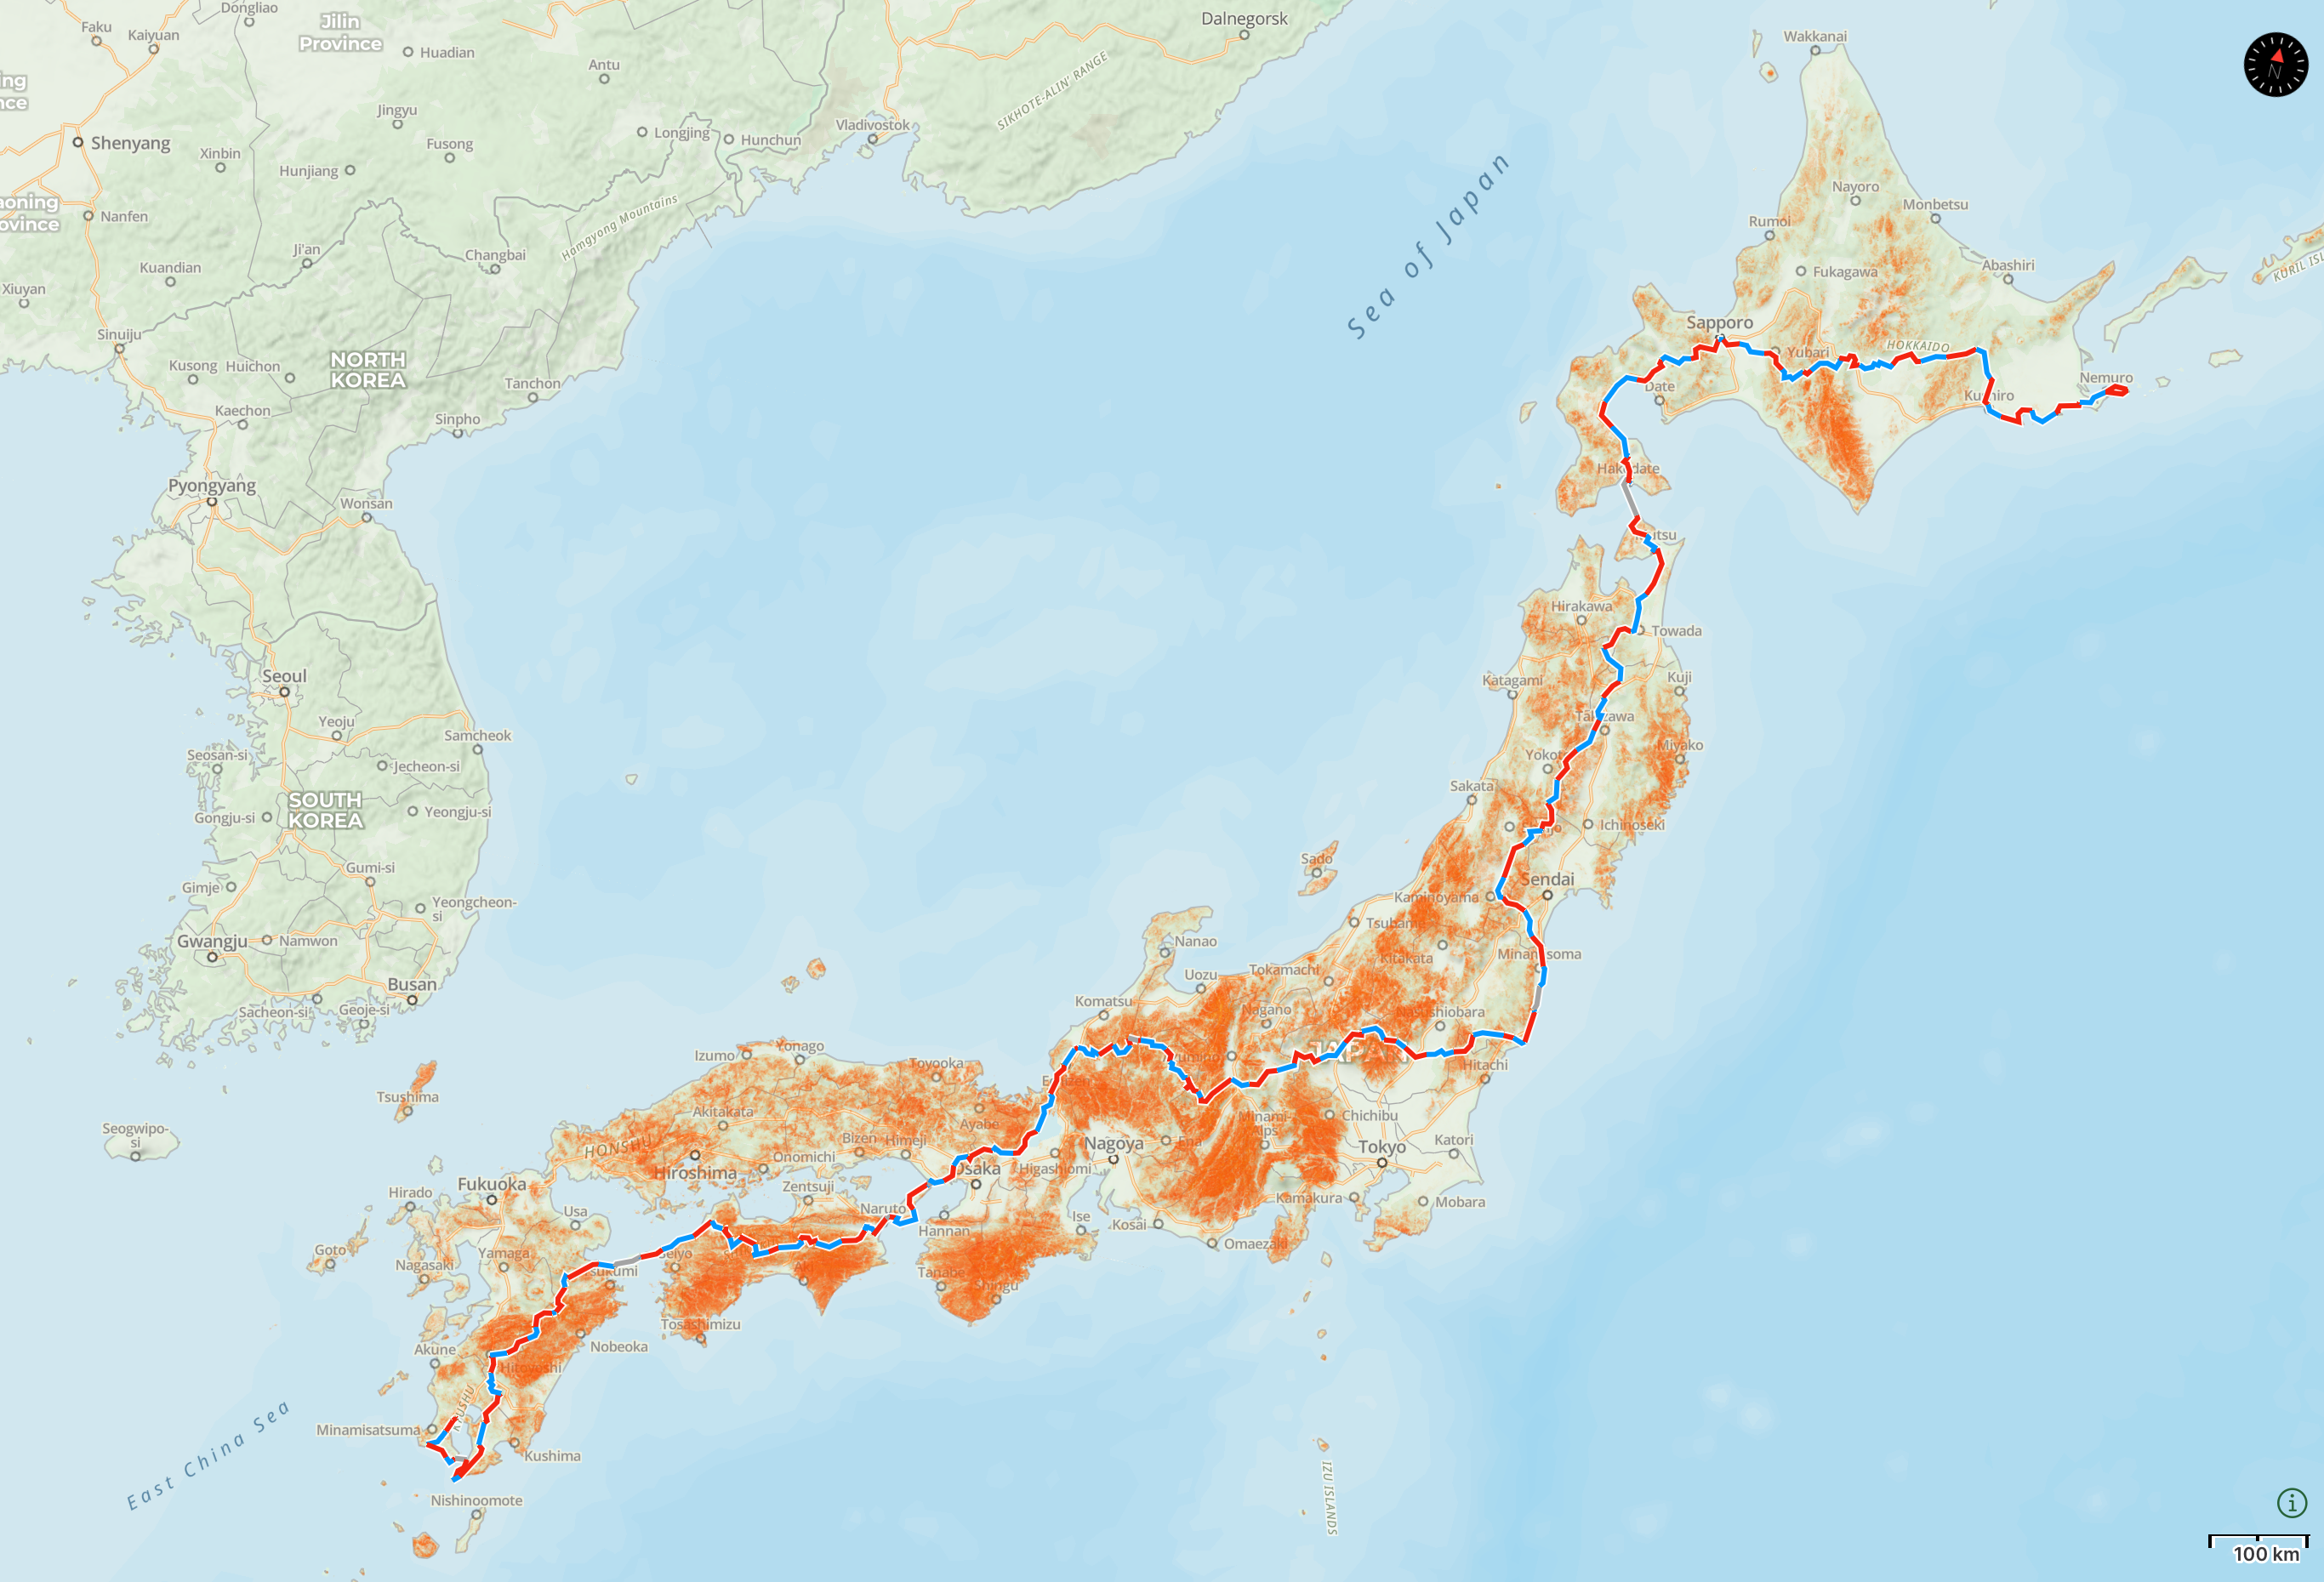 Map of Japan with the route of “These Walking Dreams” highlighted.